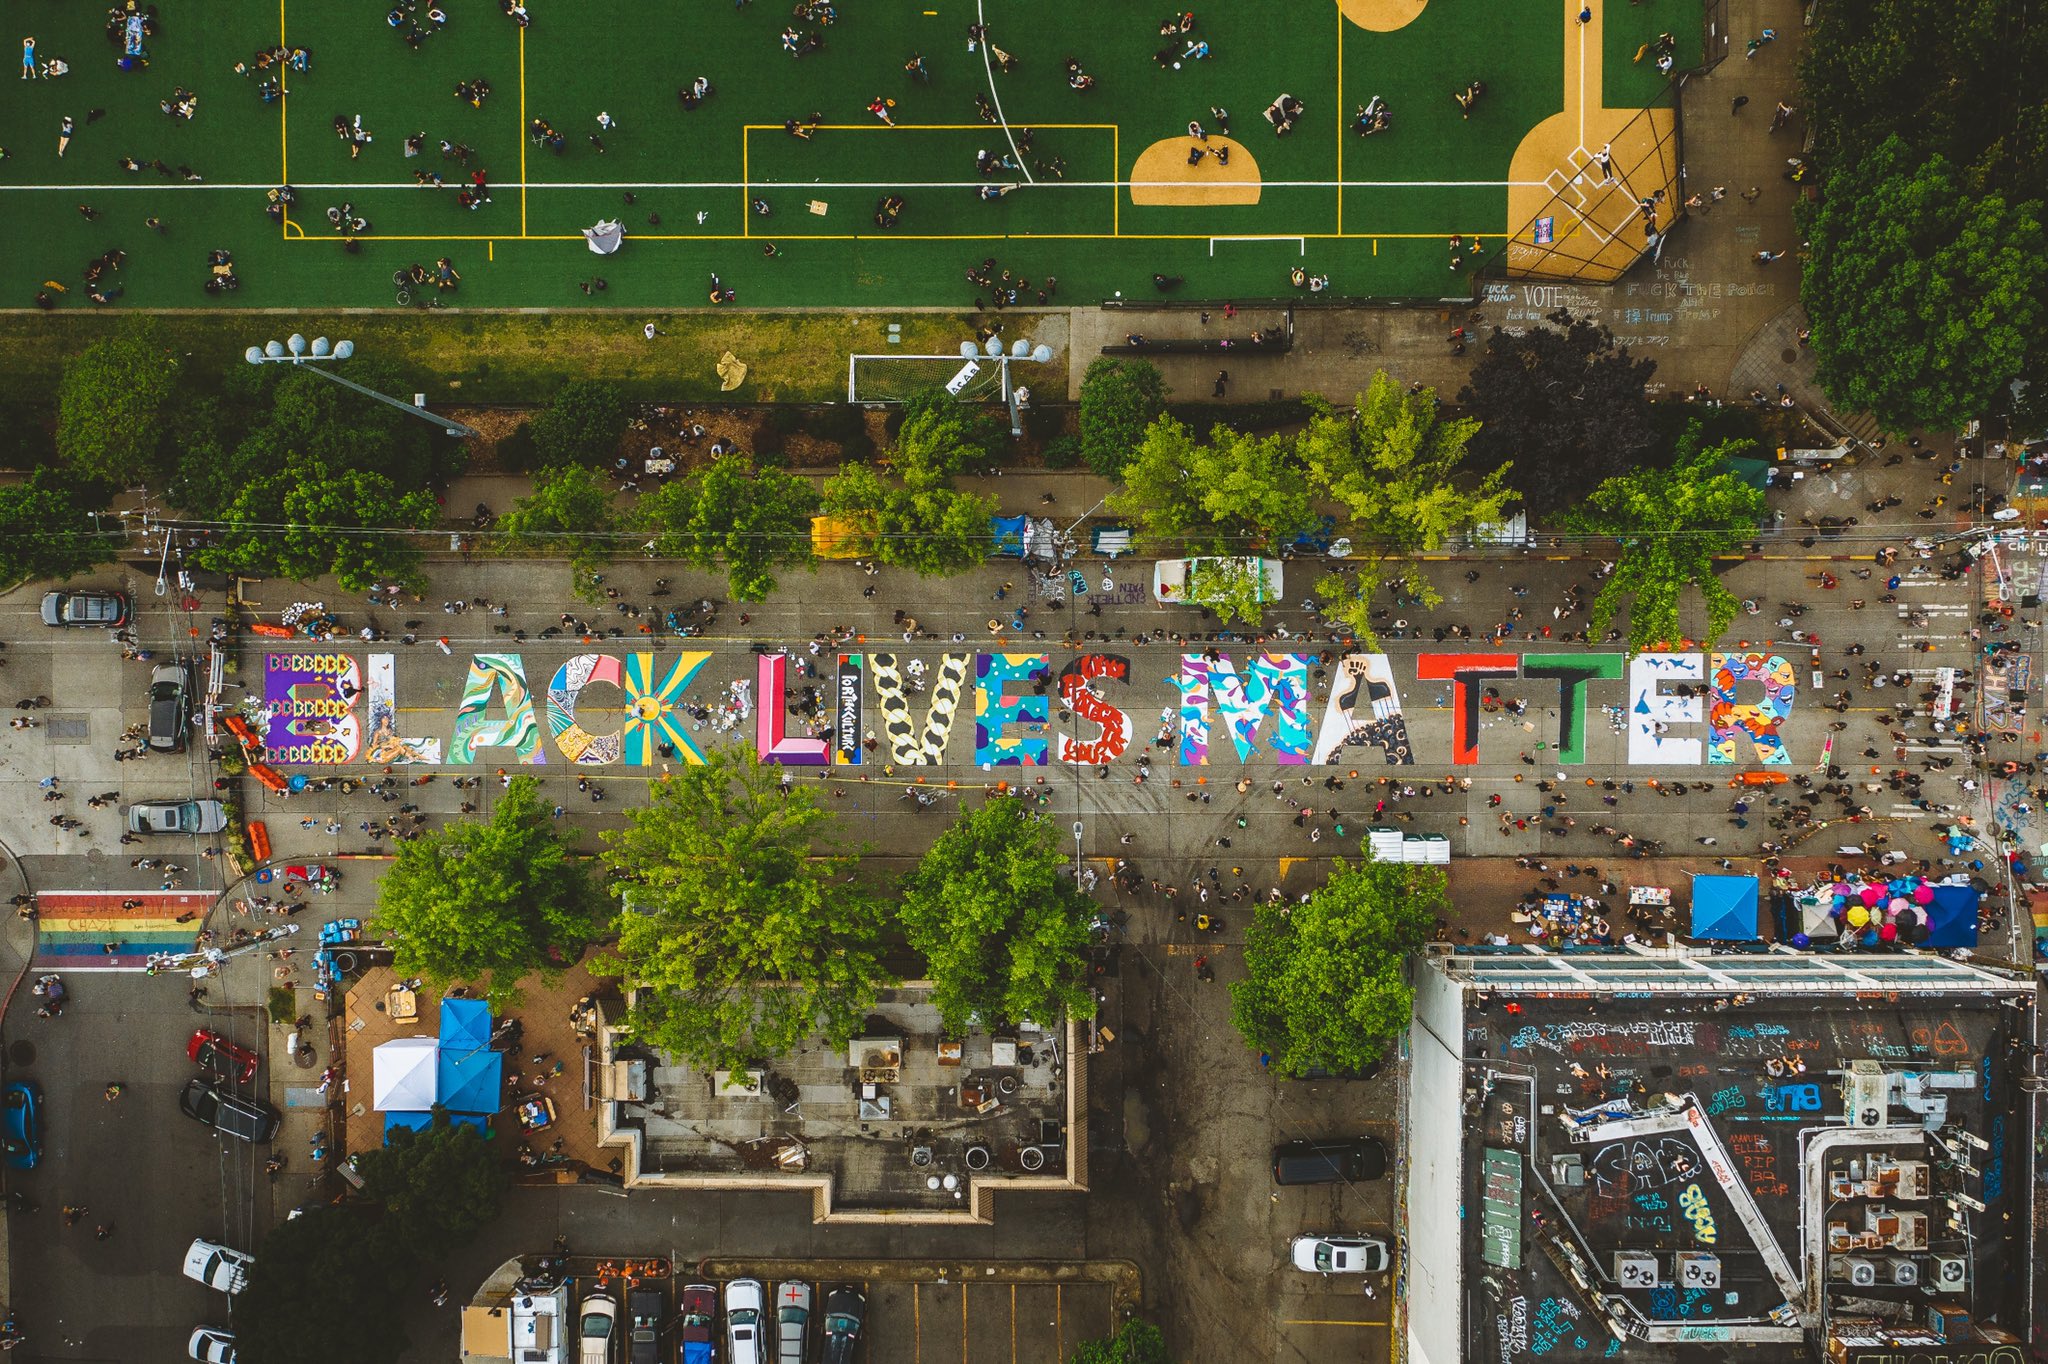 Aerial view of Black Lives Matter mural in Seattle's Capitol Hill neighborhood